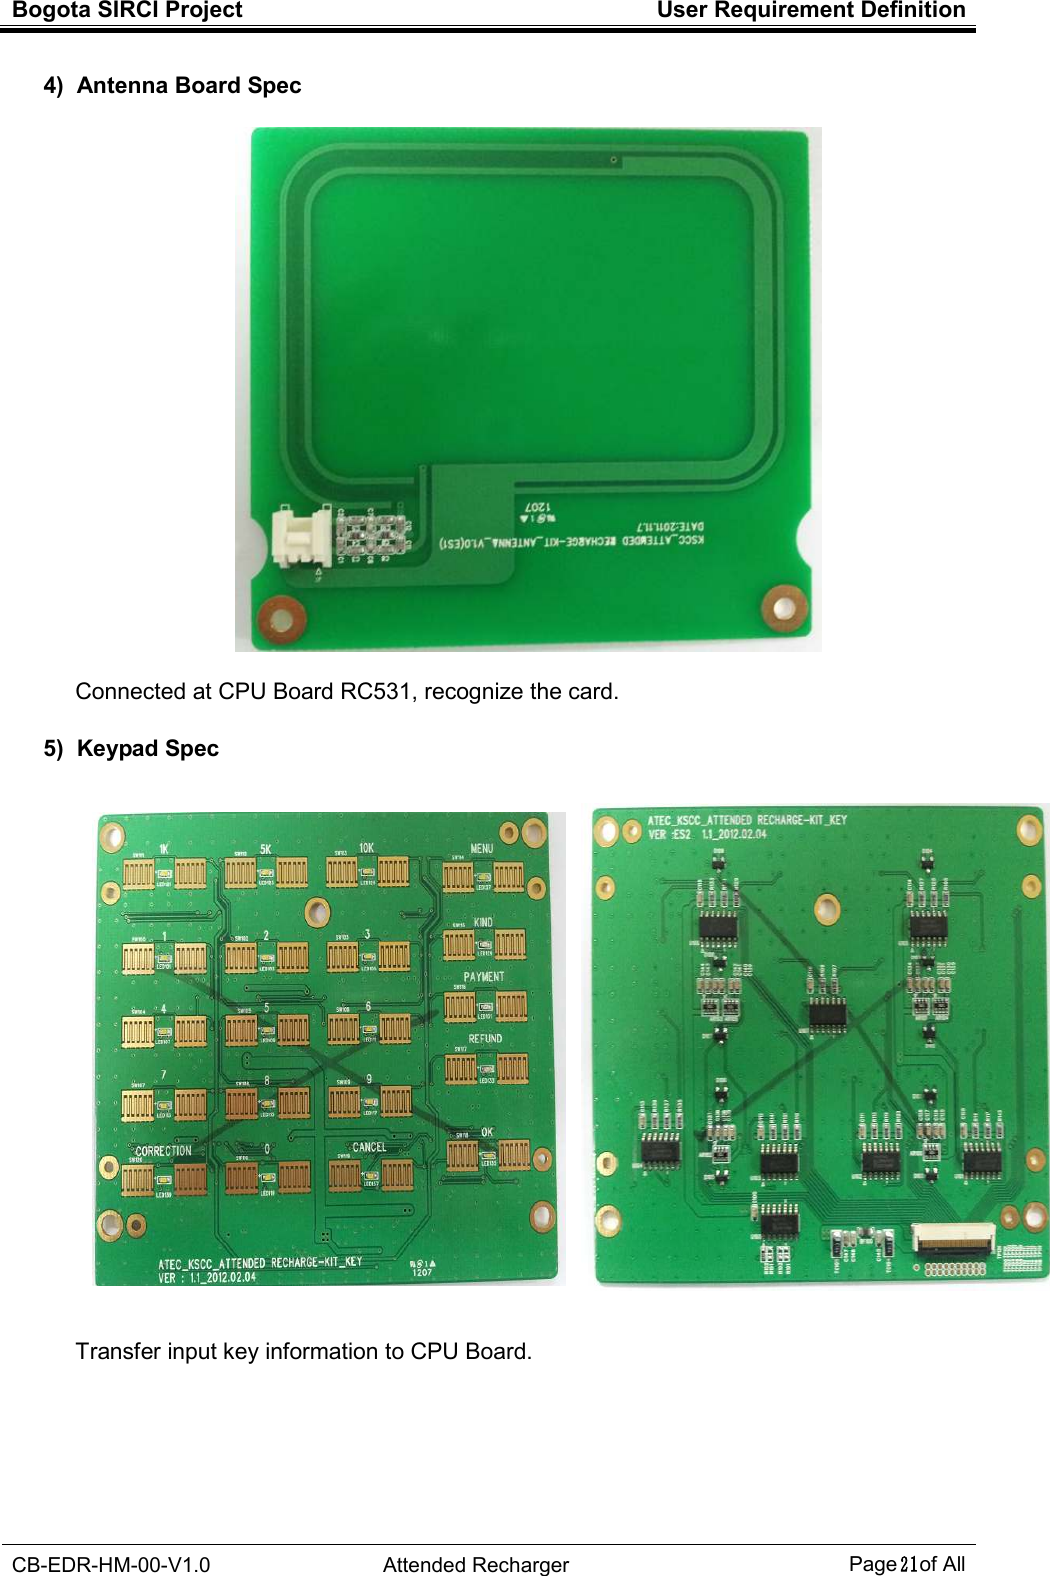 Bogota SIRCI Project  User Requirement Definition  CB-EDR-HM-00-V1.0  Attended Recharger Page２１ of All  4)  Antenna Board Spec    Connected at CPU Board RC531, recognize the card.  5)  Keypad Spec      Transfer input key information to CPU Board.         